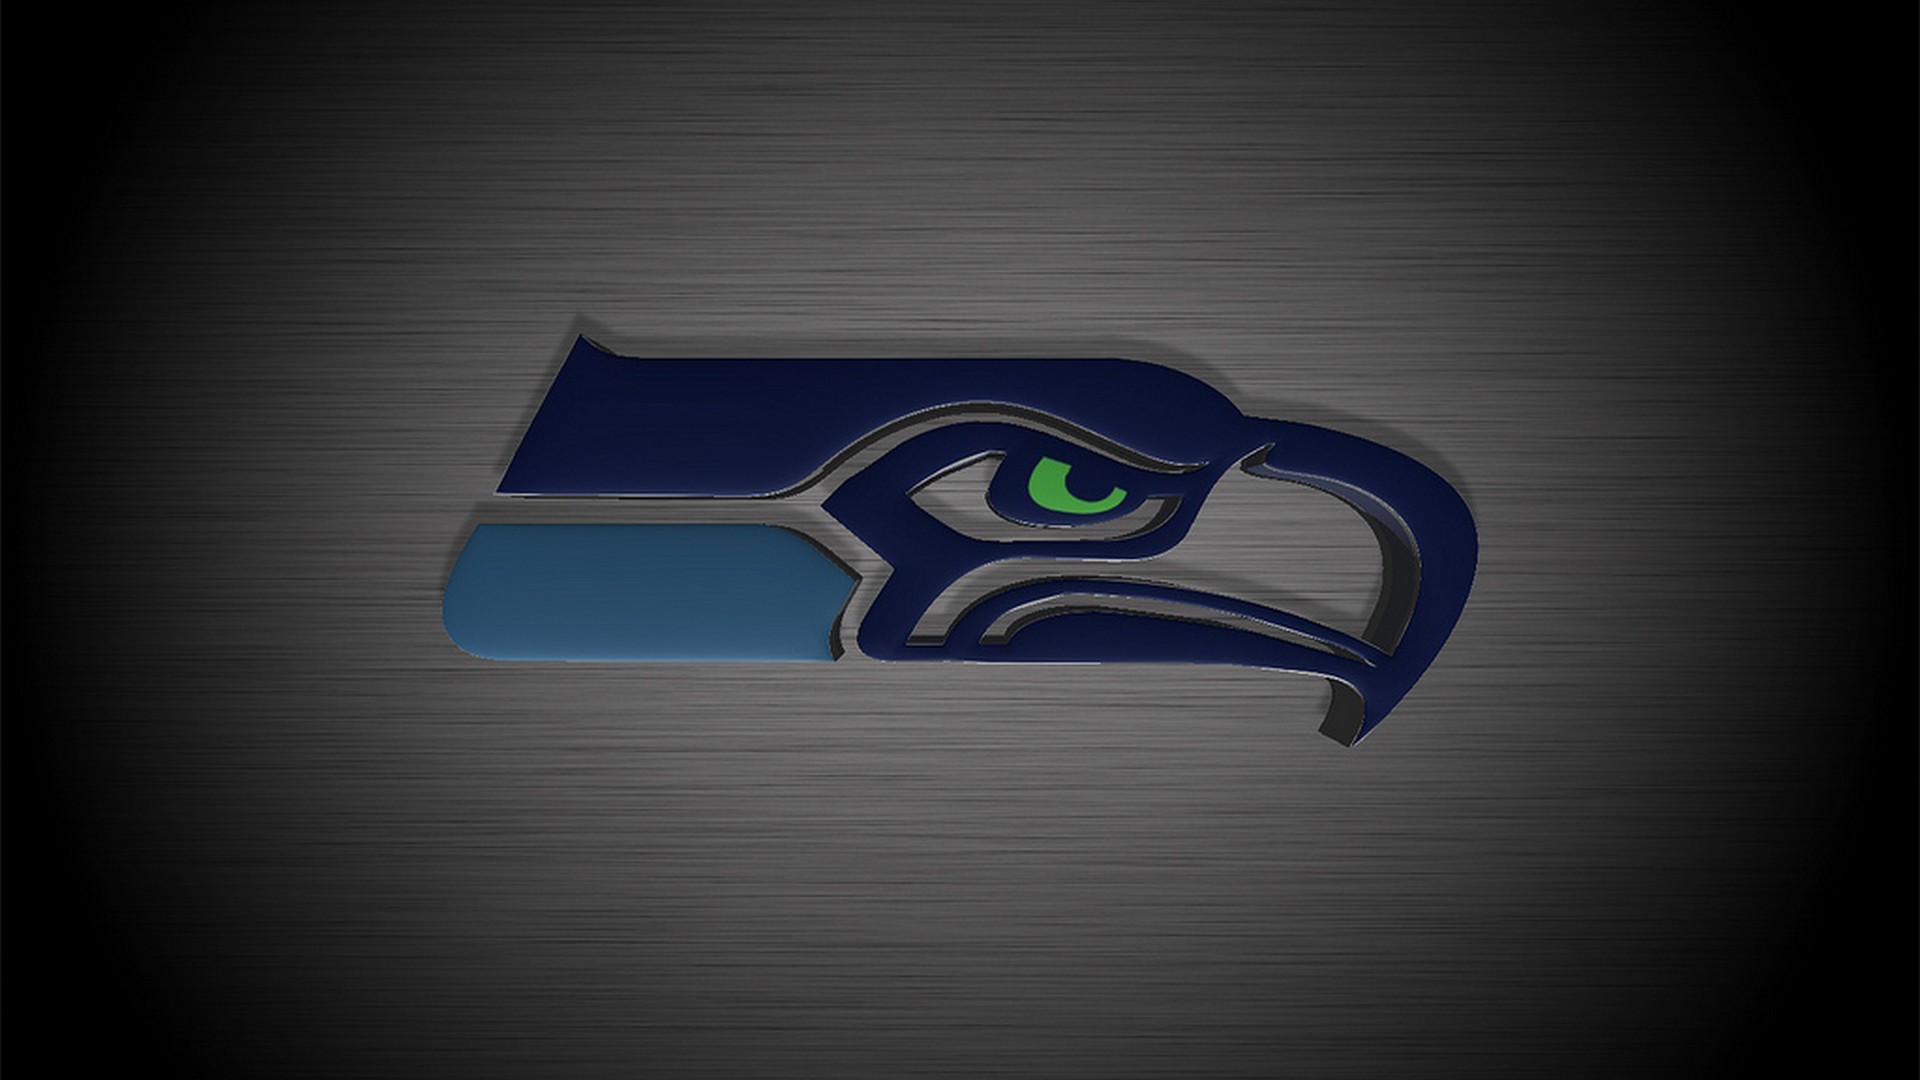 Seattle Seahawks NFL Wallpaper HD With high-resolution 1920X1080 pixel. You can use this wallpaper for your Mac or Windows Desktop Background, iPhone, Android or Tablet and another Smartphone device